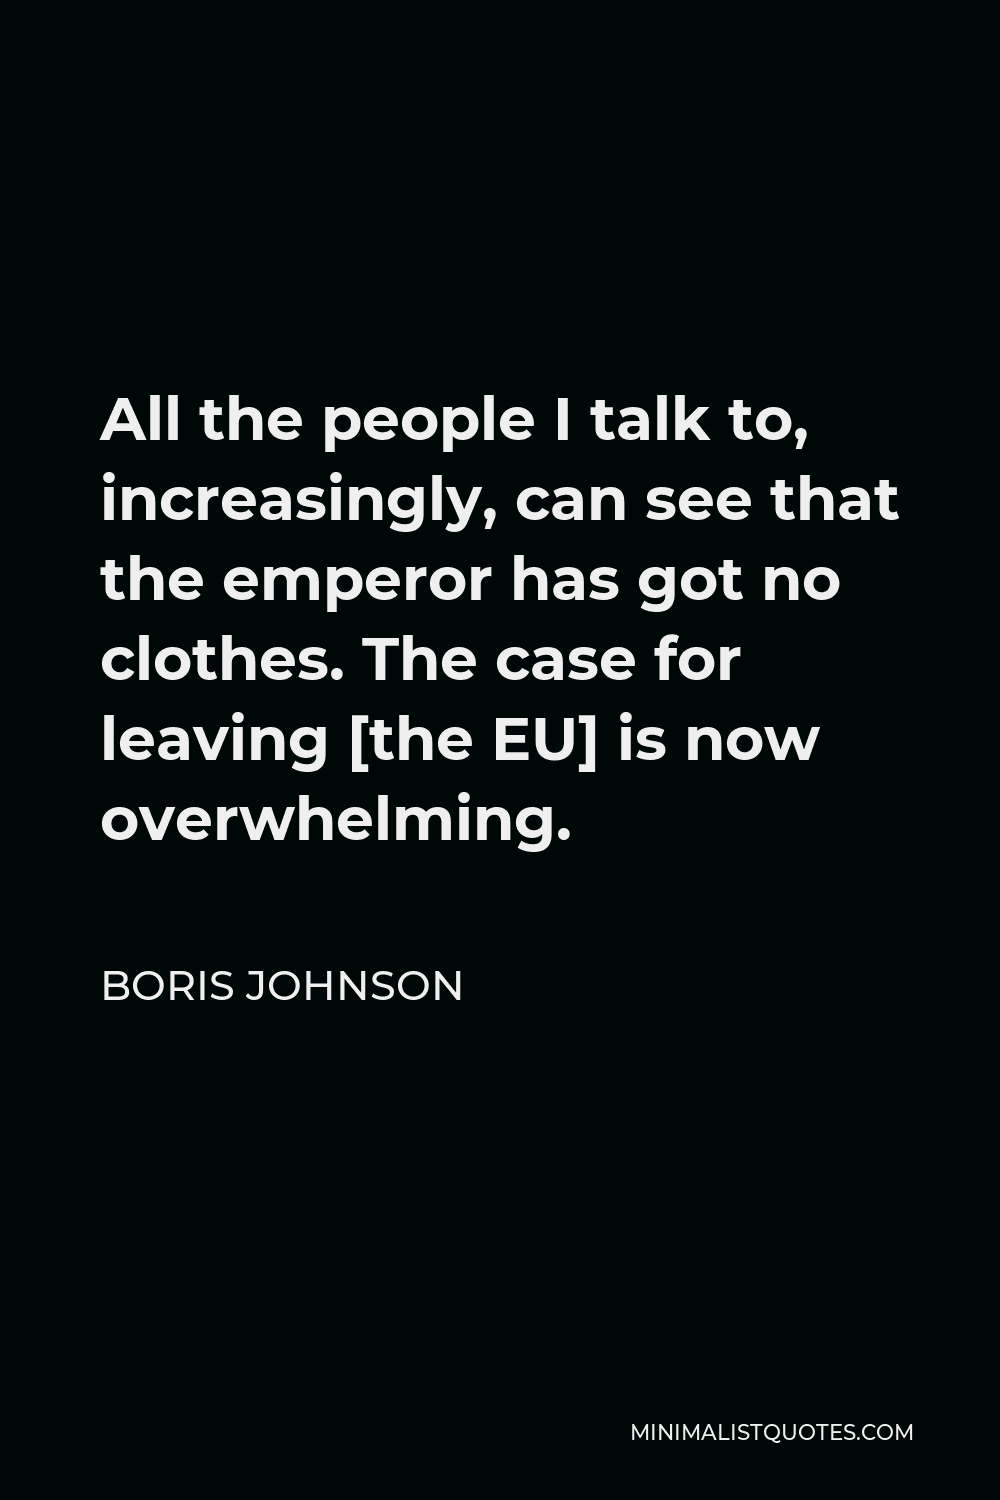 Boris Johnson Quote - All the people I talk to, increasingly, can see that the emperor has got no clothes. The case for leaving [the EU] is now overwhelming.